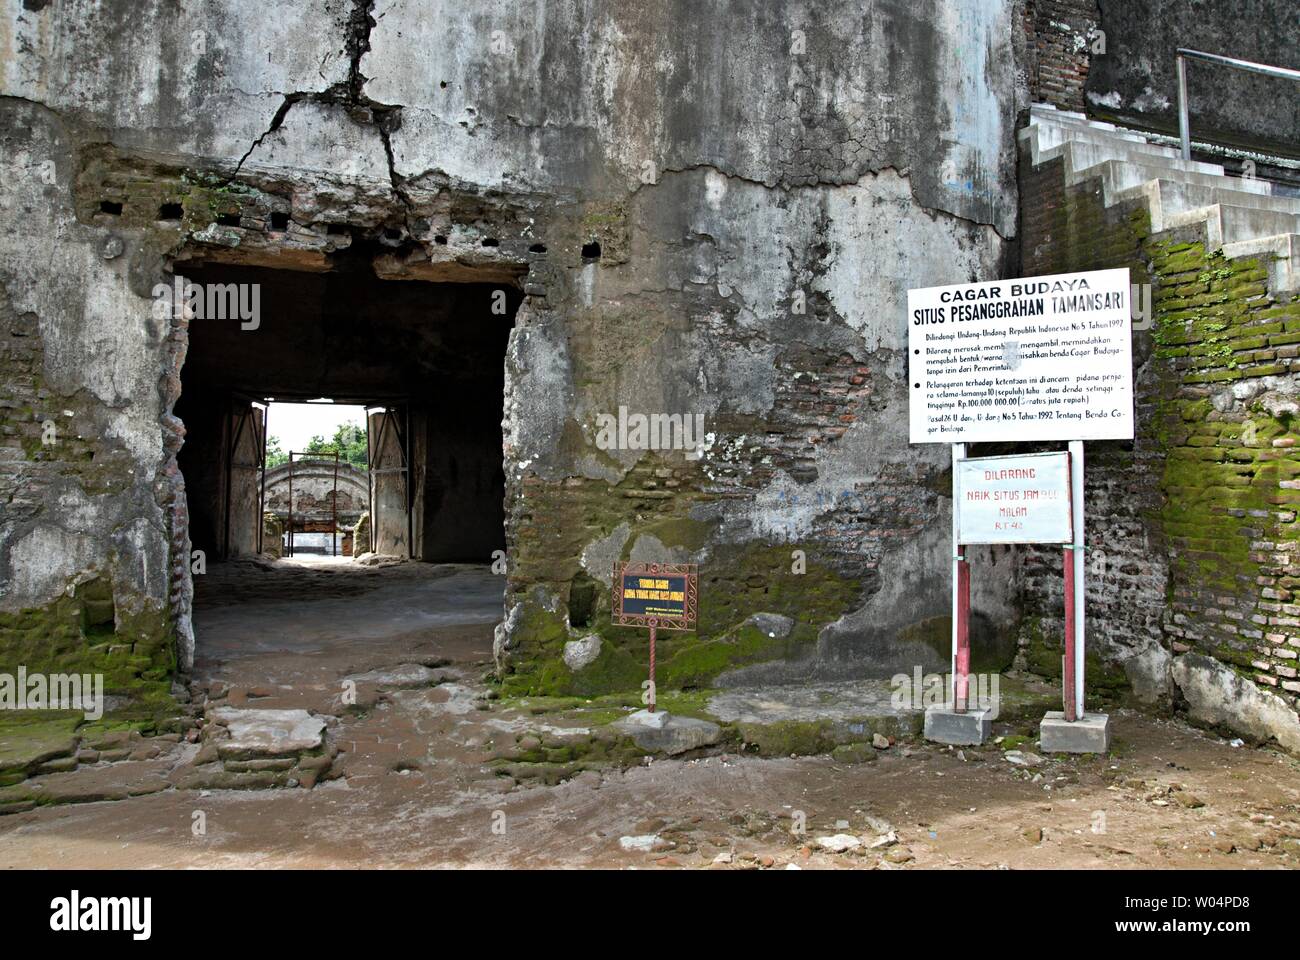 Sign boards & door in Taman Sari Water Castle. Taman Sari is the heritage site of a former royal garden of the Sultanate of Yogyakarta. Stock Photo